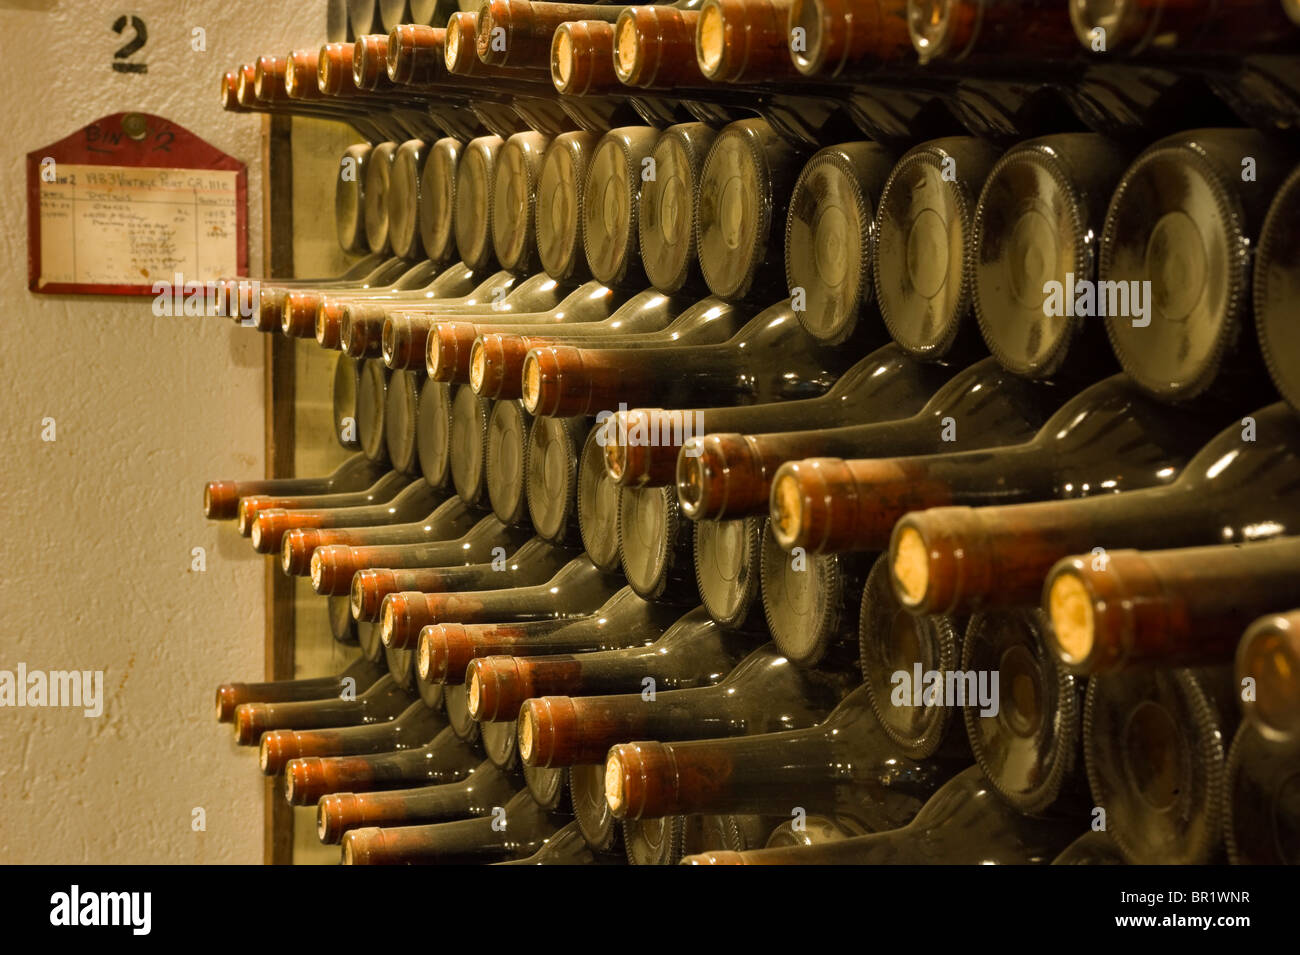 Australia South Australia Barossa Valley. Dust-covered bottles of port dated 1983 stored to age at Seppelt Winery Stock Photo